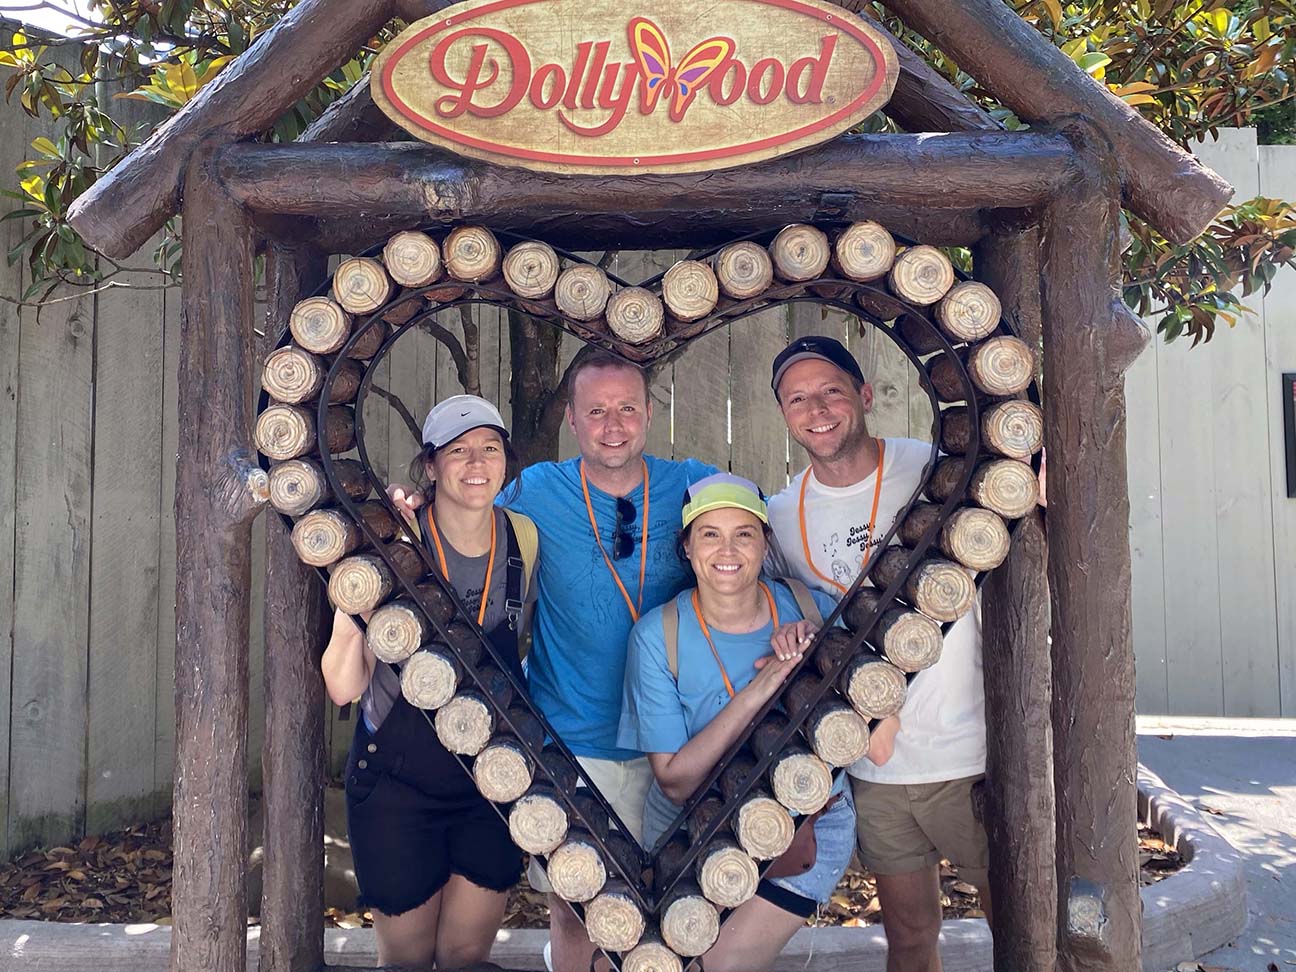 Lightning Rod at Dollywood Wins Wooden Coaster of the Decade Award